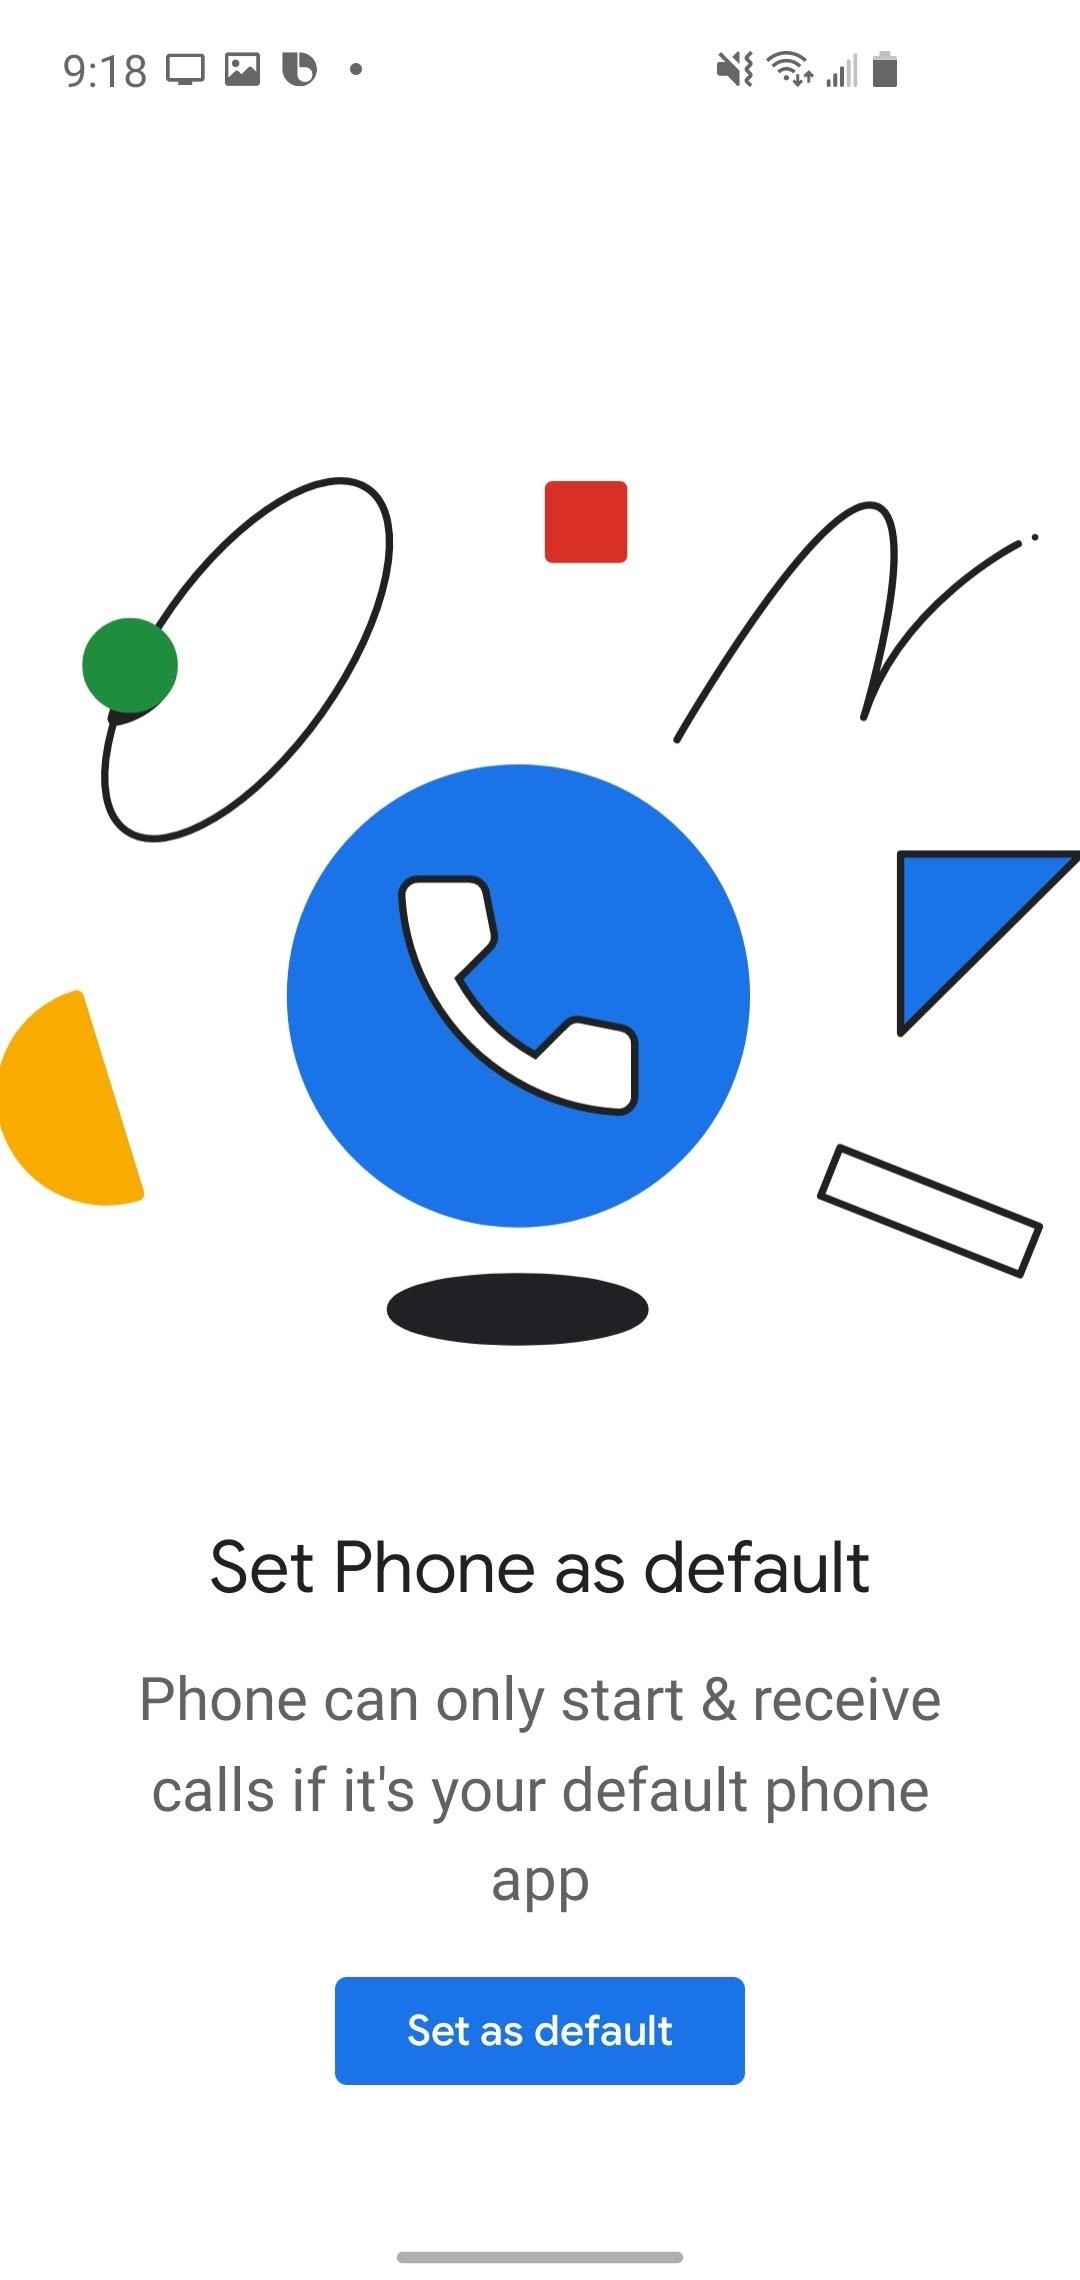 How to Customize the Quick Responses for Declining Calls in the Google Phone App